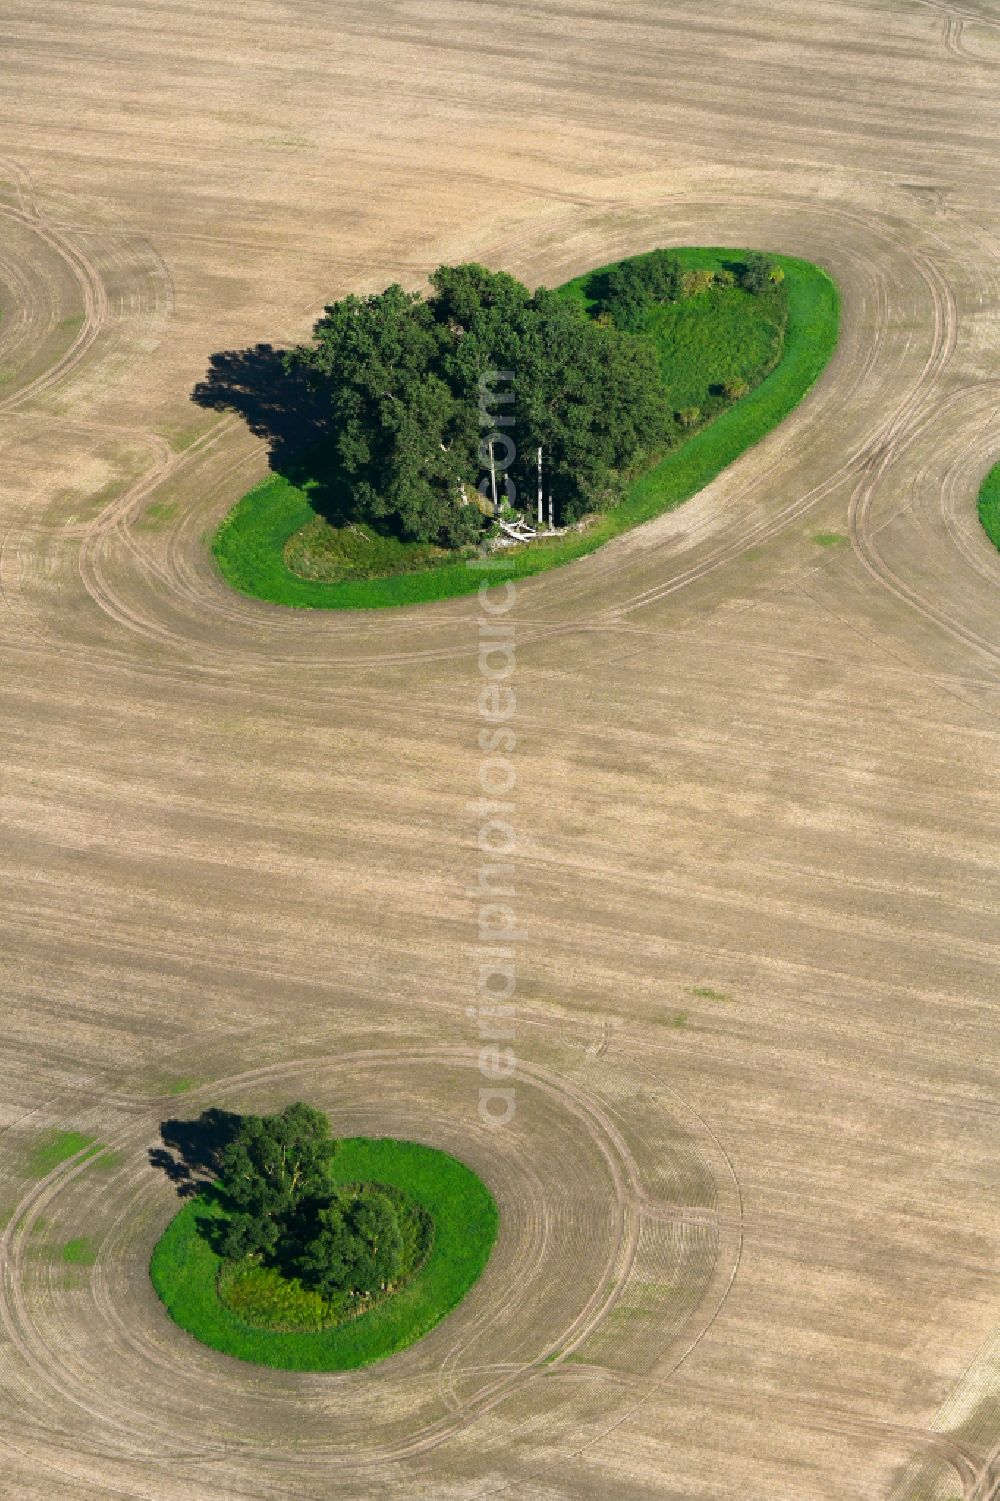 Aerial image Tützpatz - Island of trees in a field in Tuetzpatz in the state Mecklenburg - Western Pomerania, Germany